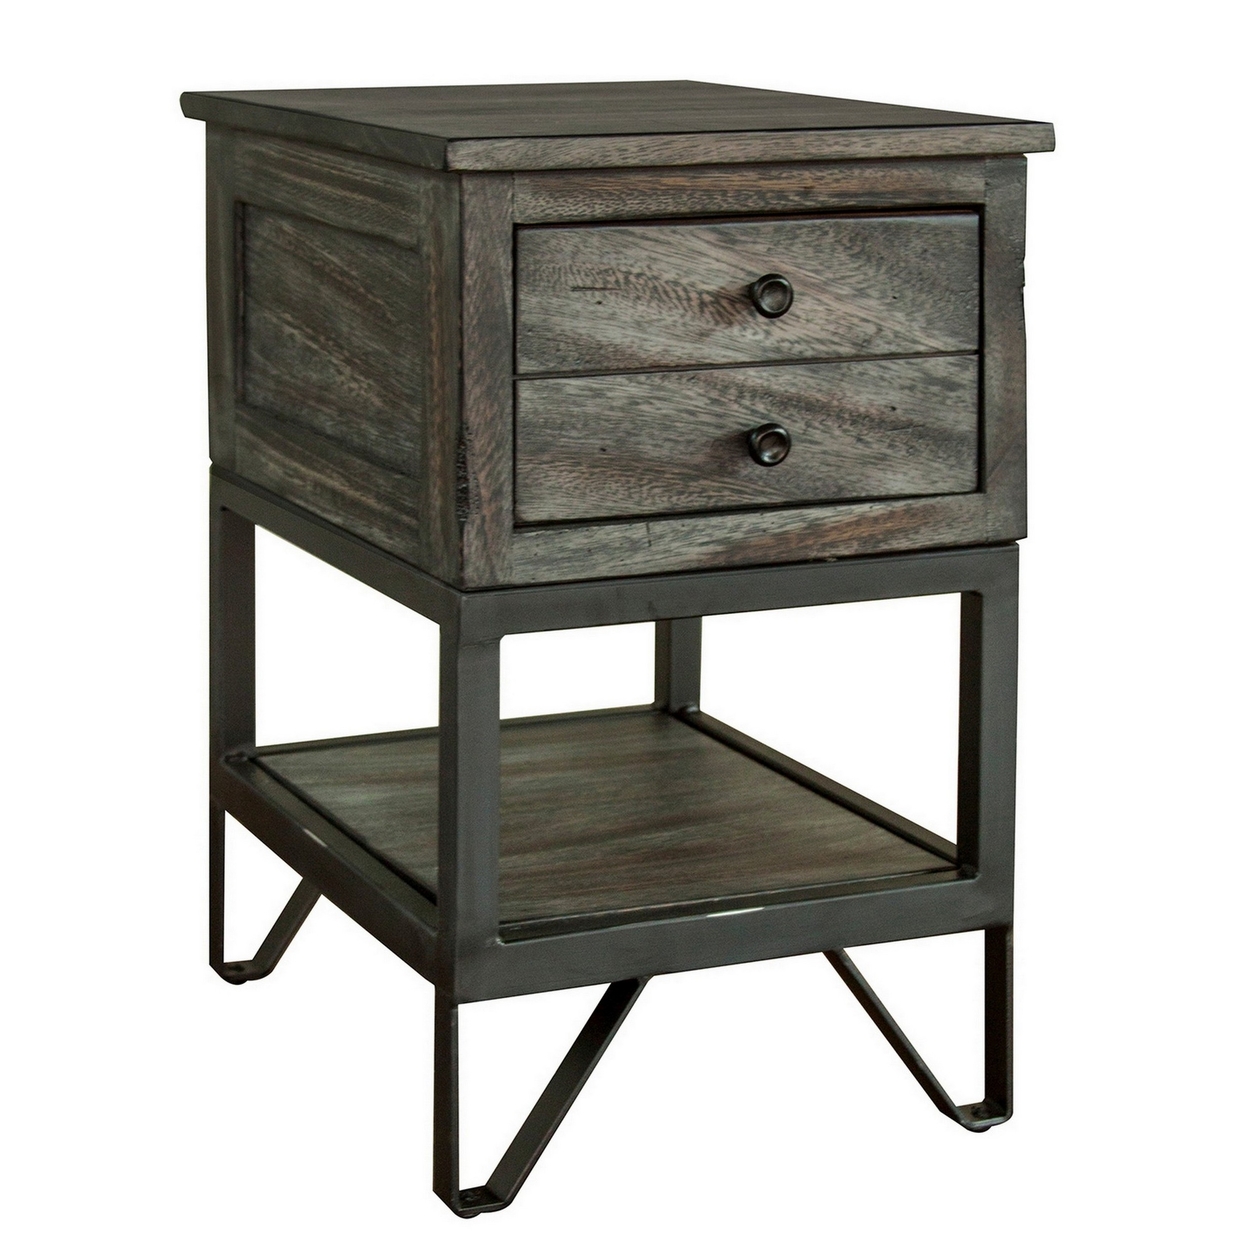 Ello 24 Inch 1 Drawer Chairside End Table With Shelf, Solid Wood, Gray- Saltoro Sherpi